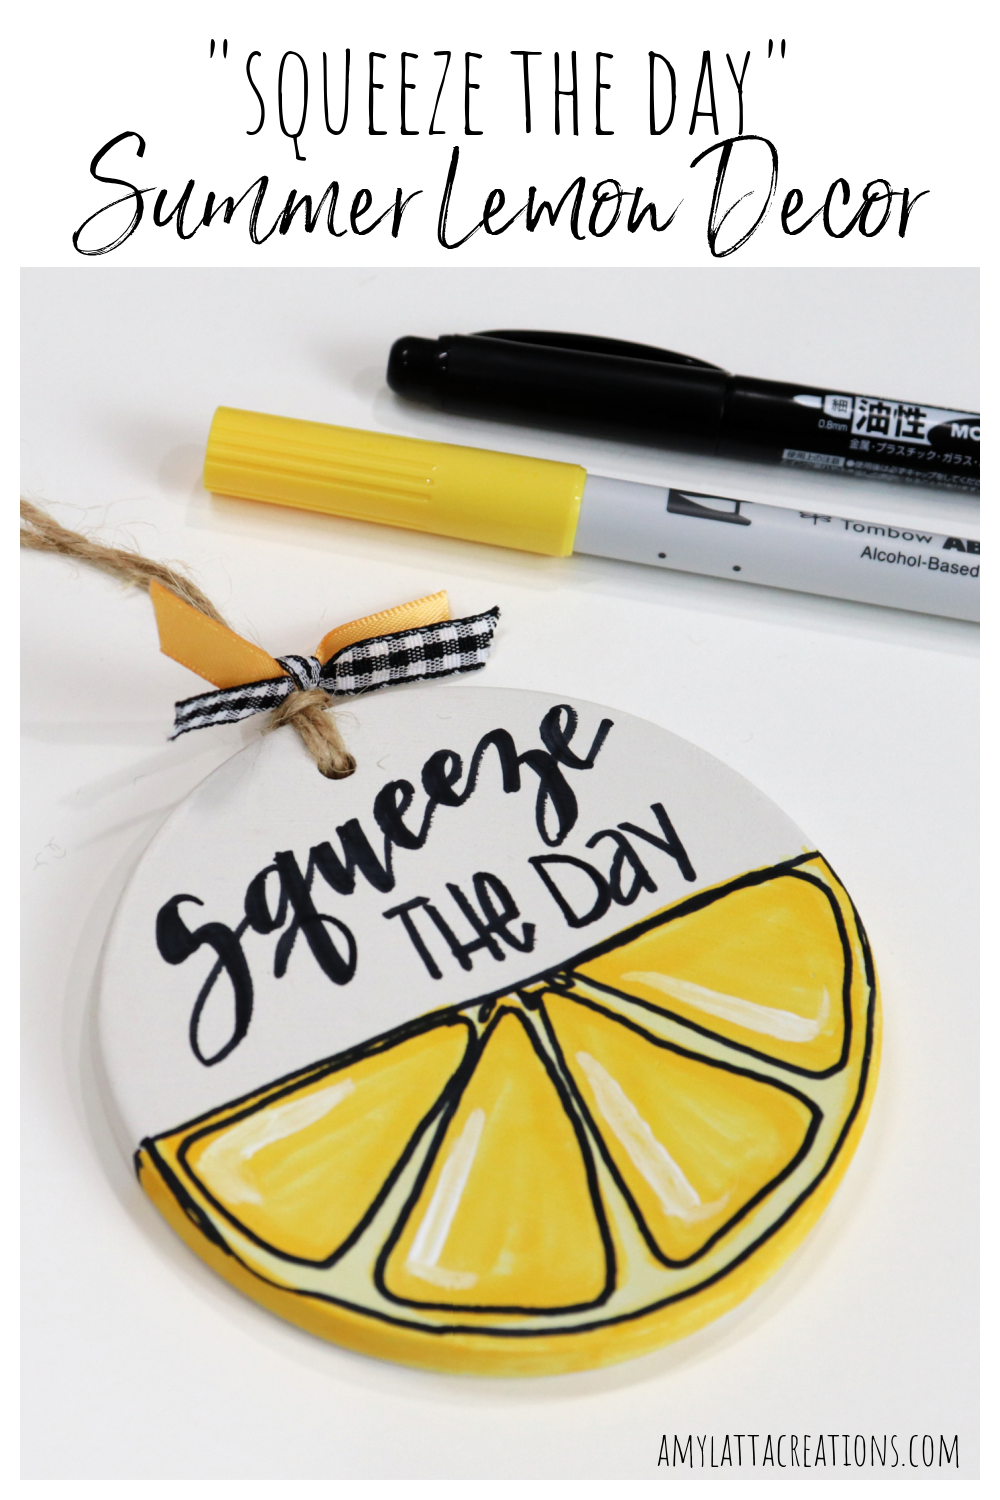 Image is a round, flat white ornament where the bottom half is painted to look like a lemon slice. The words, "Squeeze the day," are written in the top half with black marker. It sits on a white background, next to yellow and black markers.